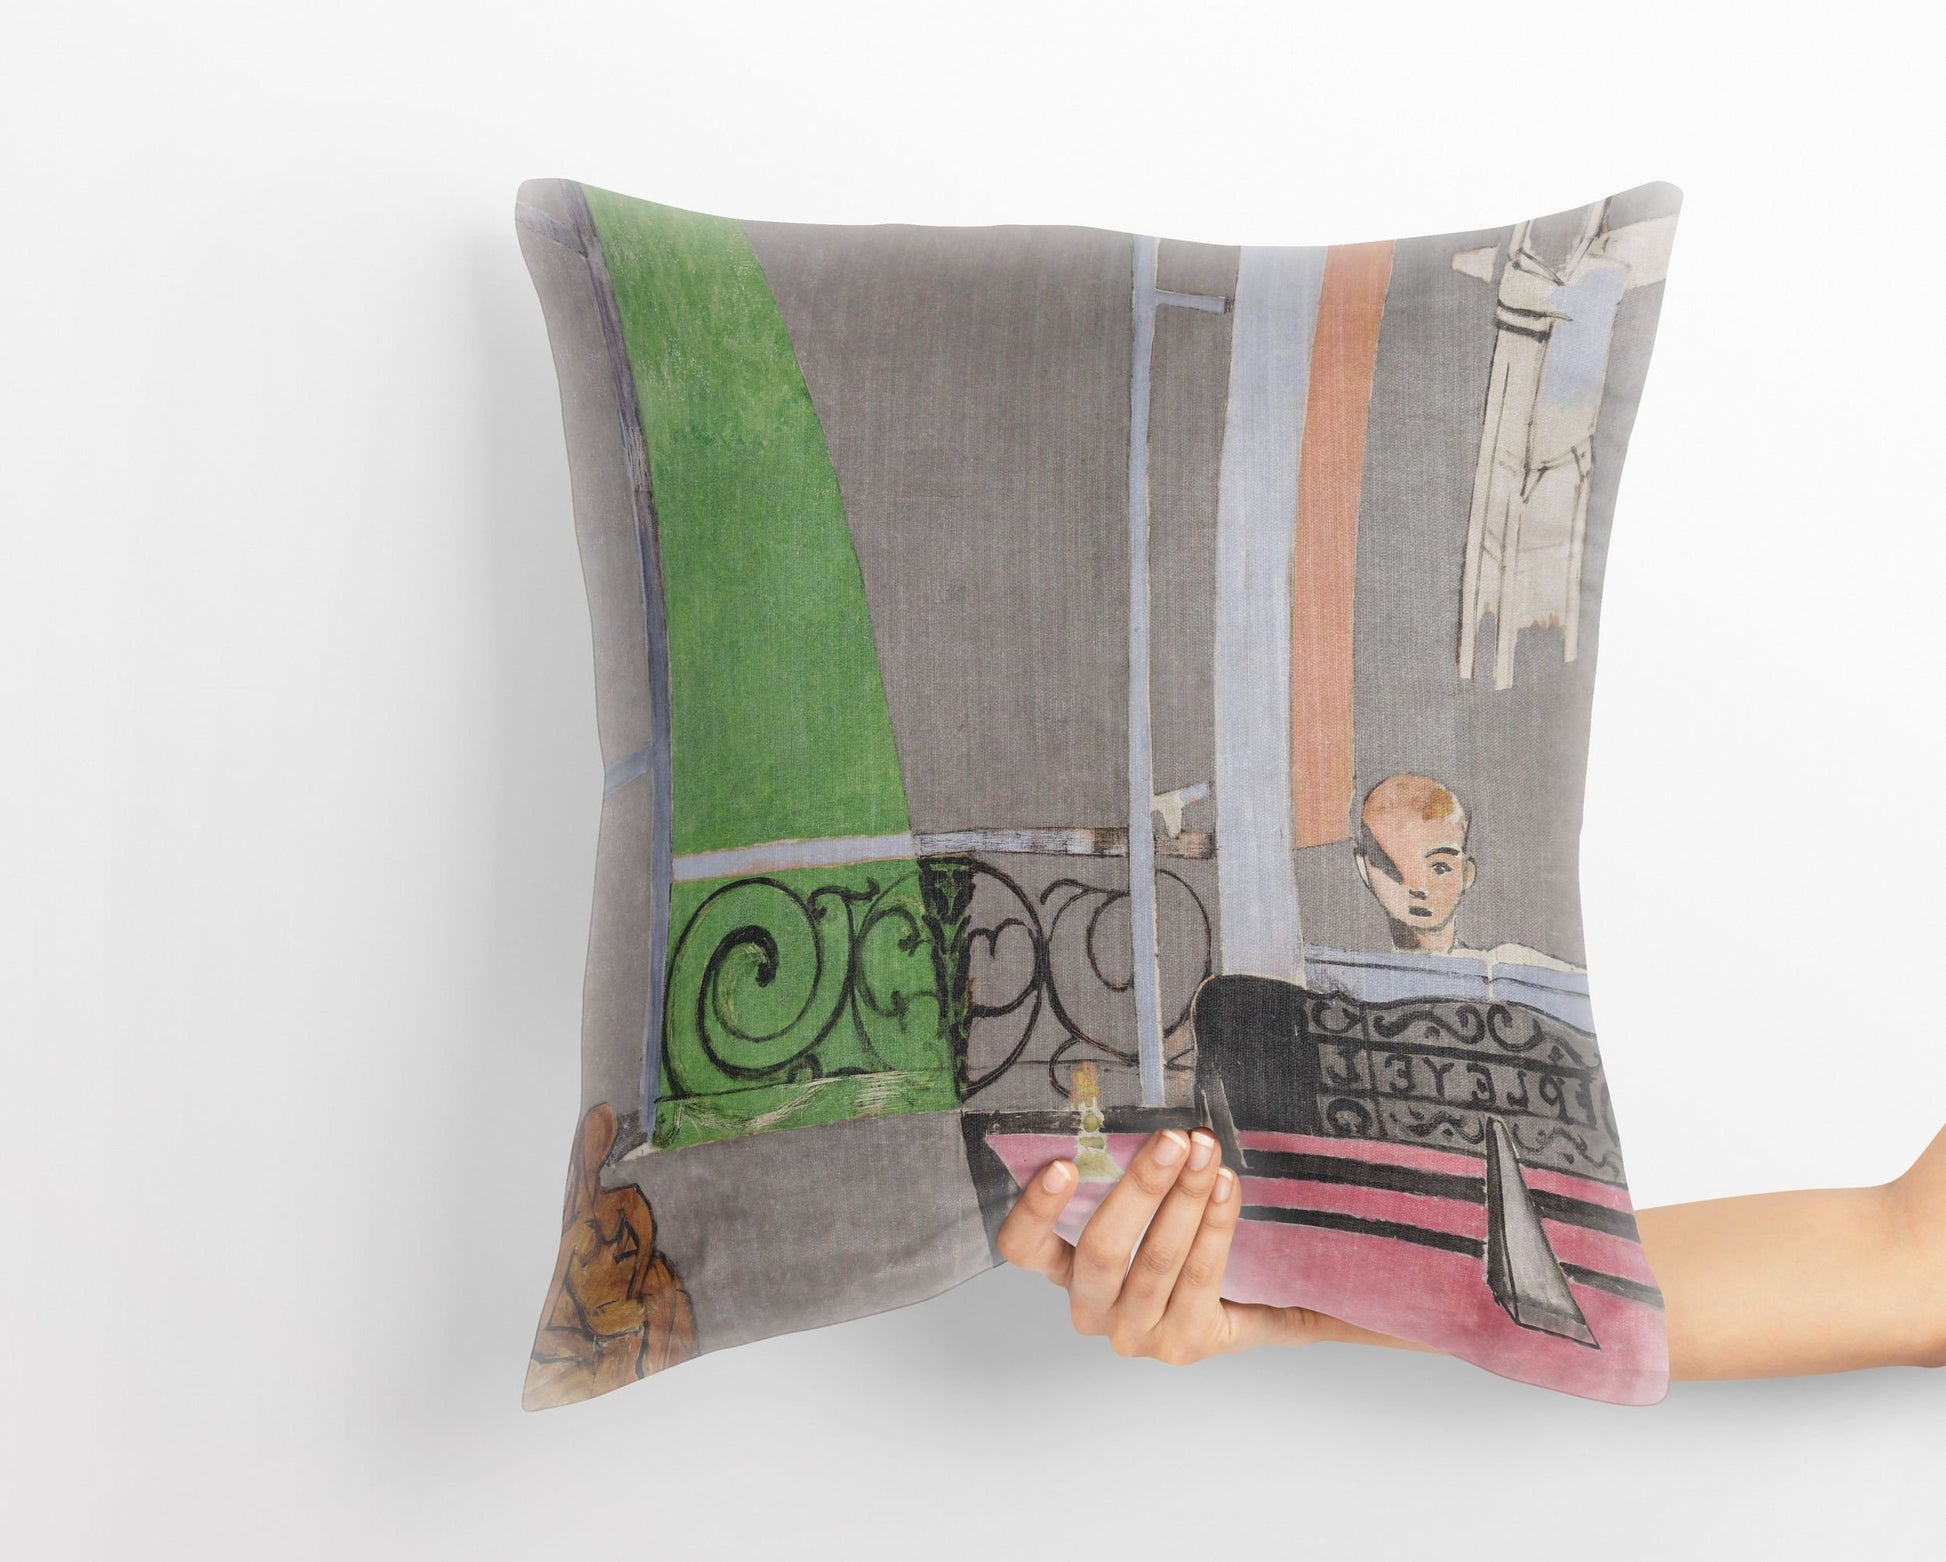 Henri Matisse Famous Painting, Throw Pillow Cover, Abstract Throw Pillow, Soft Pillow Cases, Colorful Pillow Case,  Pillow Cases Kids